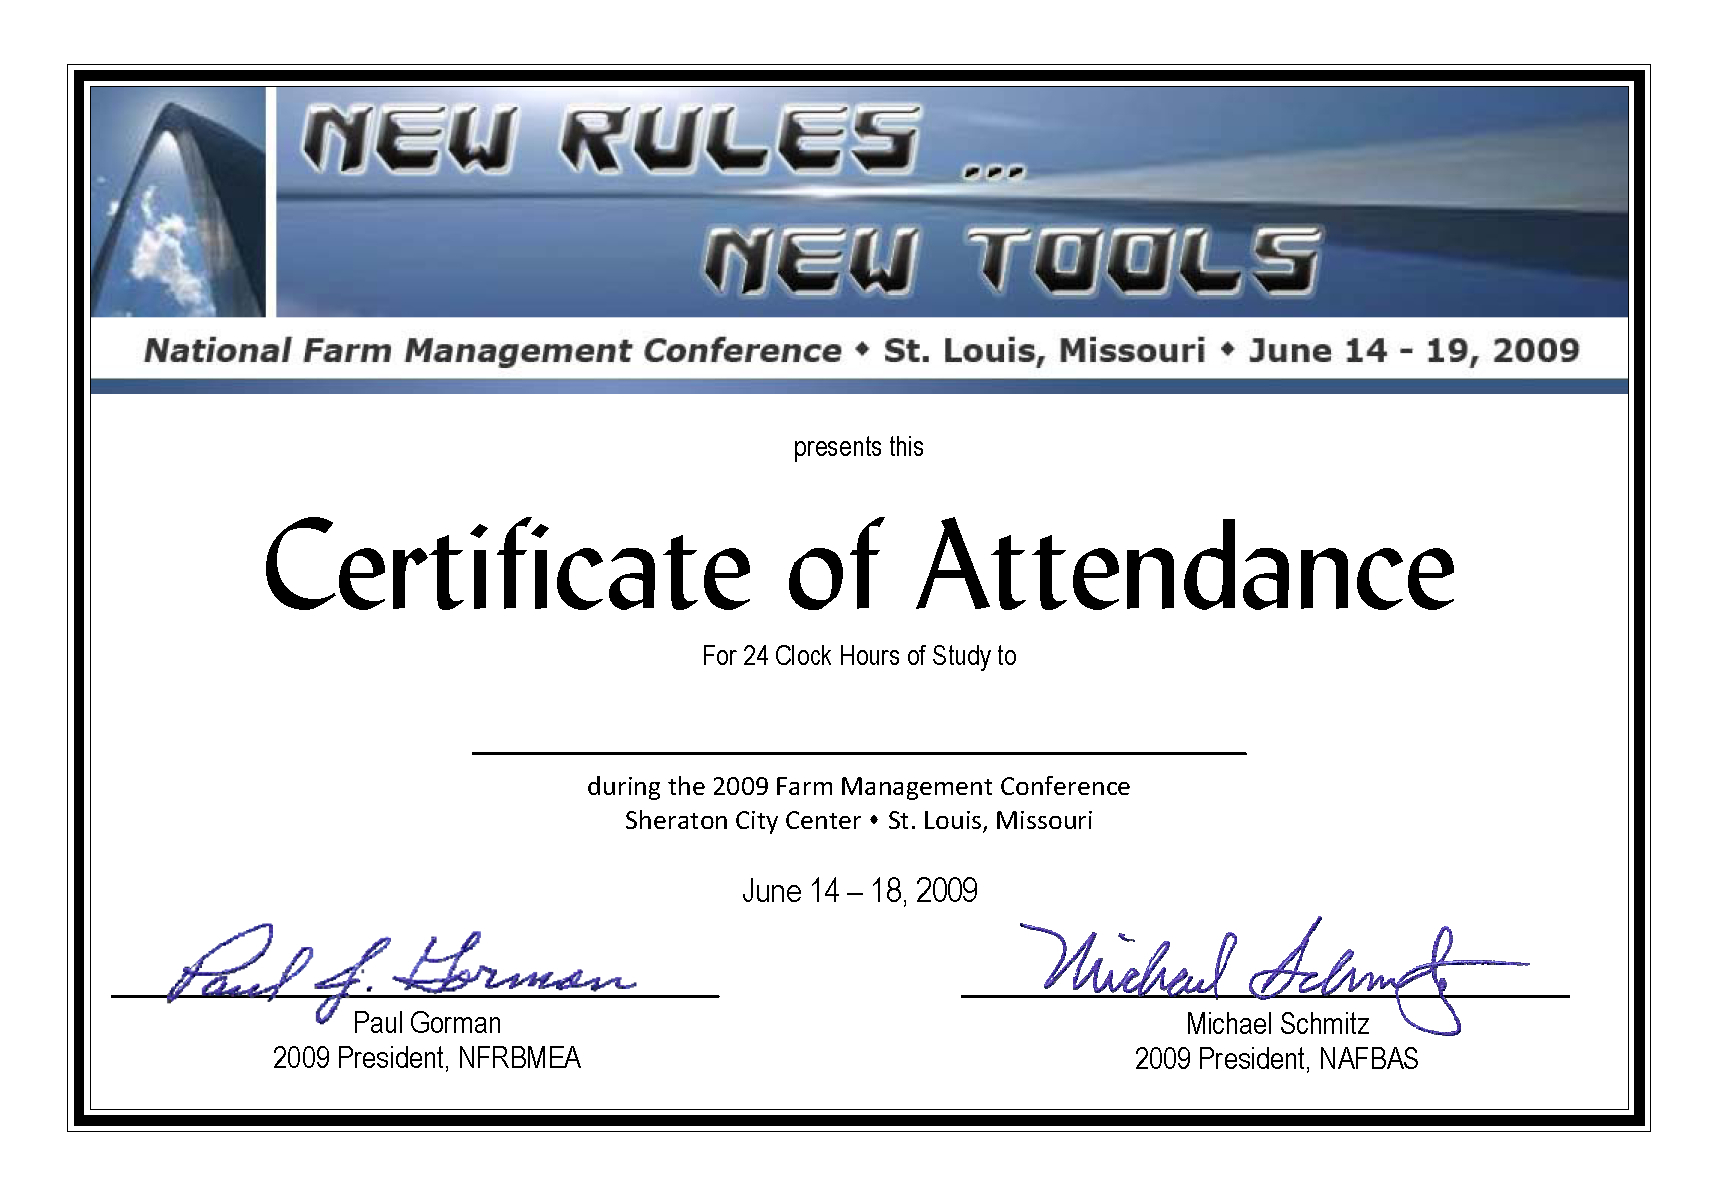 Conference Certificate Of Attendance Template – Great With Regard To Certificate Of Attendance Conference Template